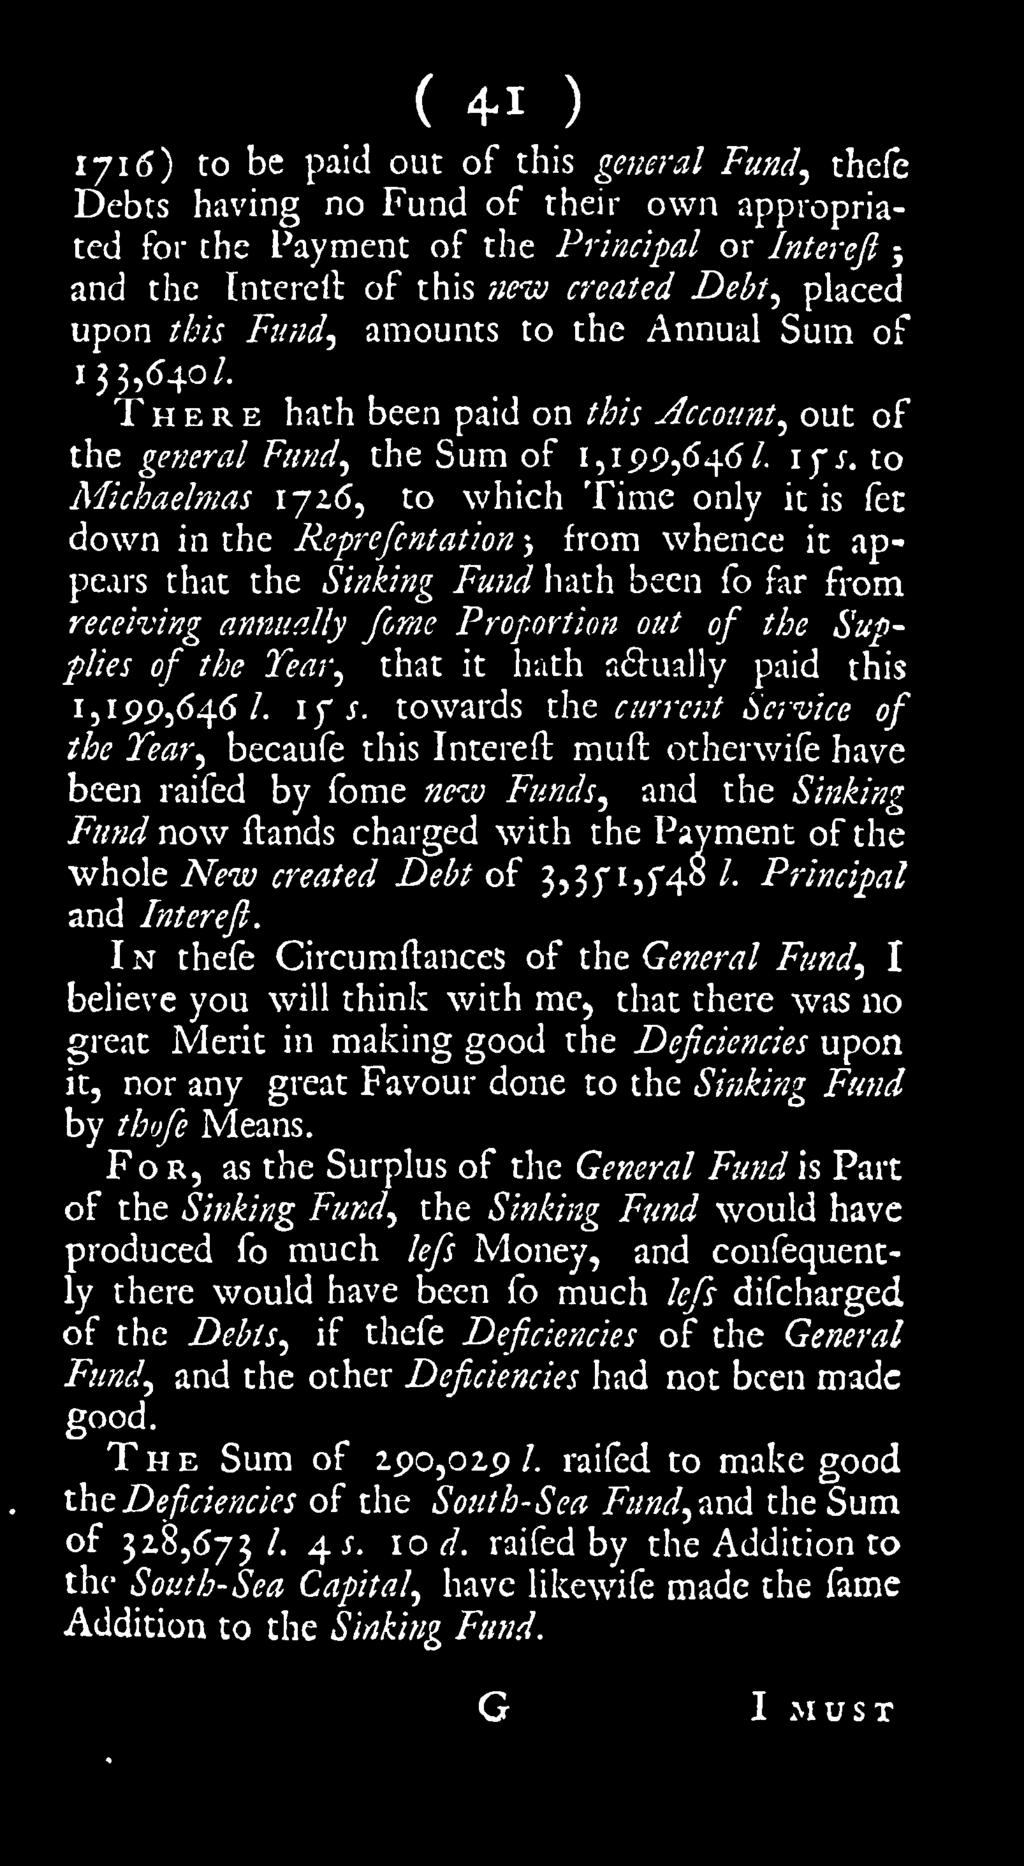 to Michaelmas 1716^ to which Time only it is fet down in the Reprefcntation 5 from whence it appears that the Sinking Fund liath been fo far from receiving annually fome Proportion out of the